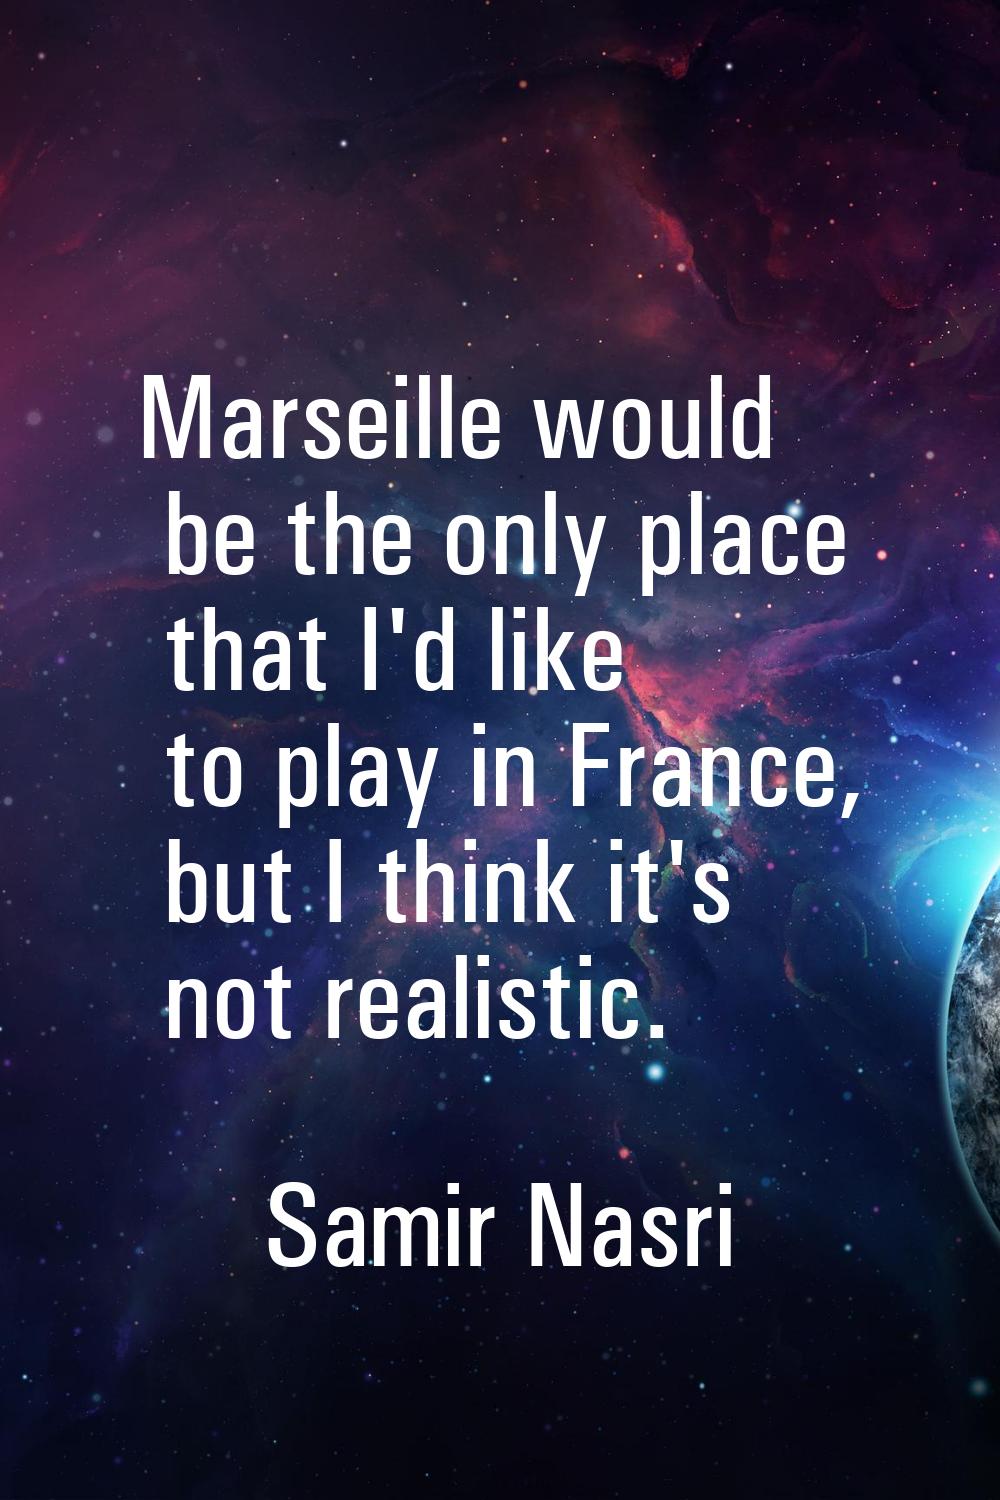 Marseille would be the only place that I'd like to play in France, but I think it's not realistic.